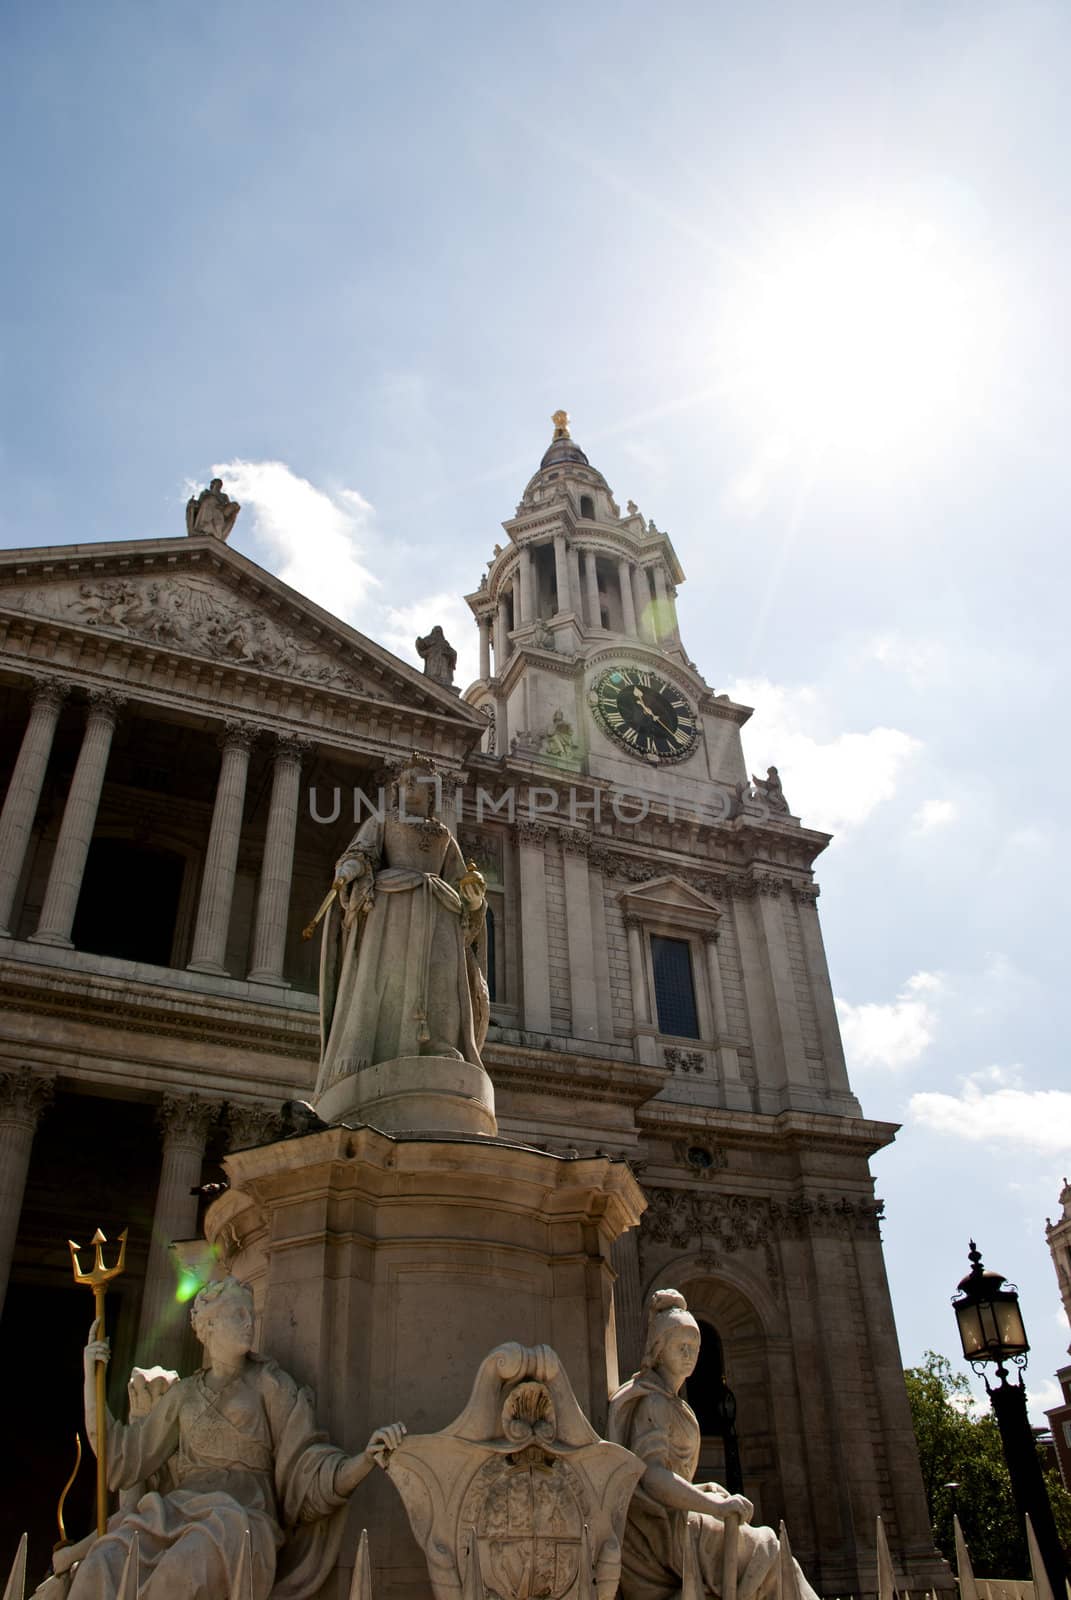 Statues in front of St Paul's cathedral in London